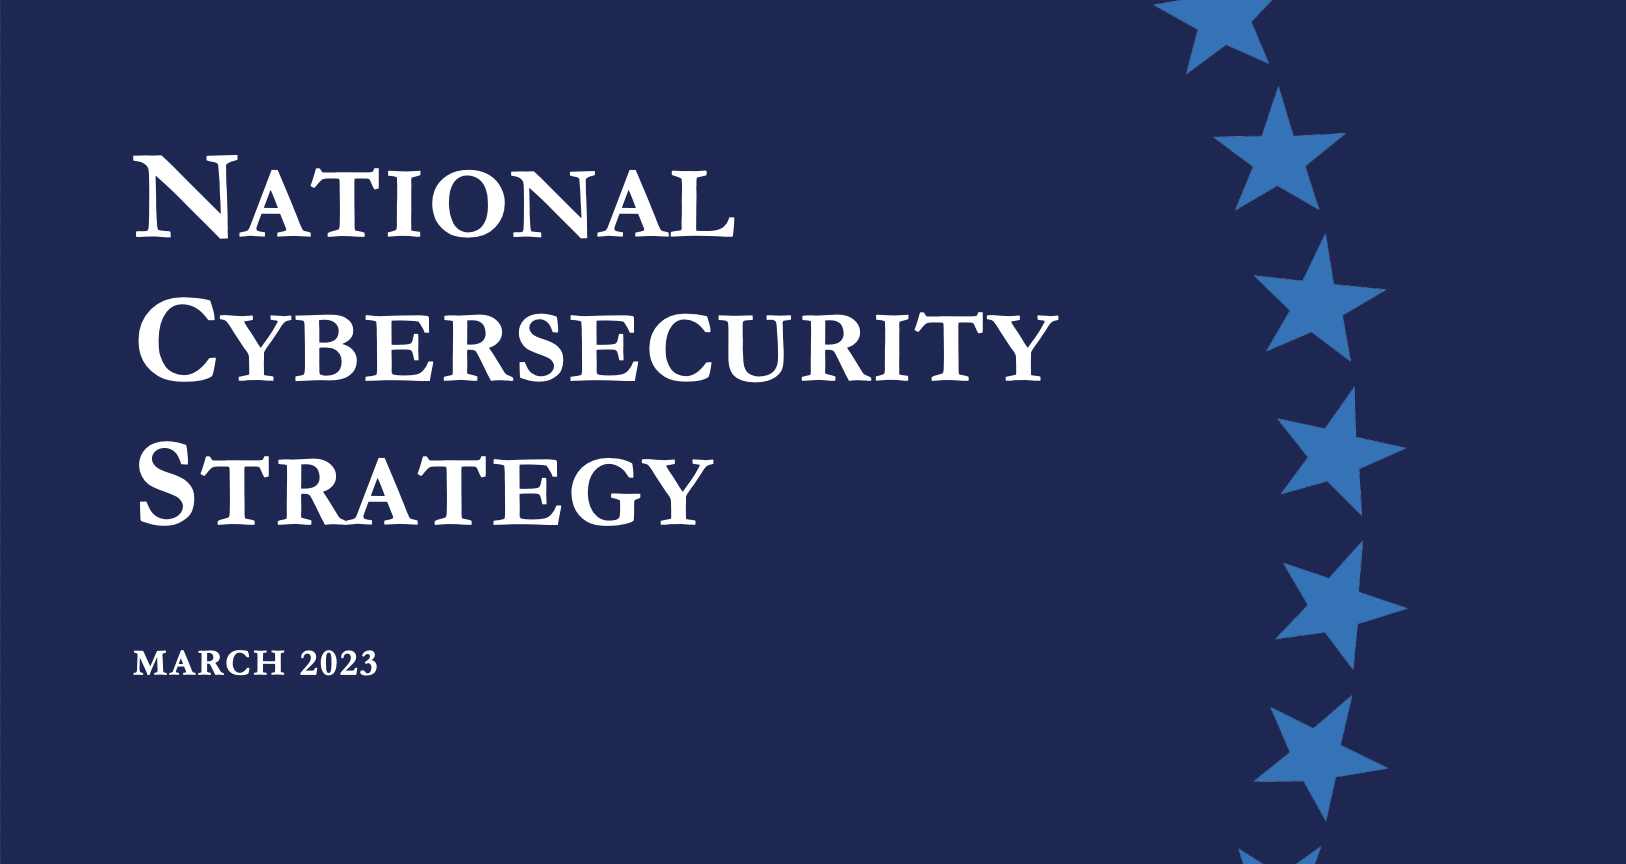 AWWA testifies on water cybersecurity before U.S. House Committee on Homeland Security(Washington, D.C.) - In a hearing today on cybersecurity b...